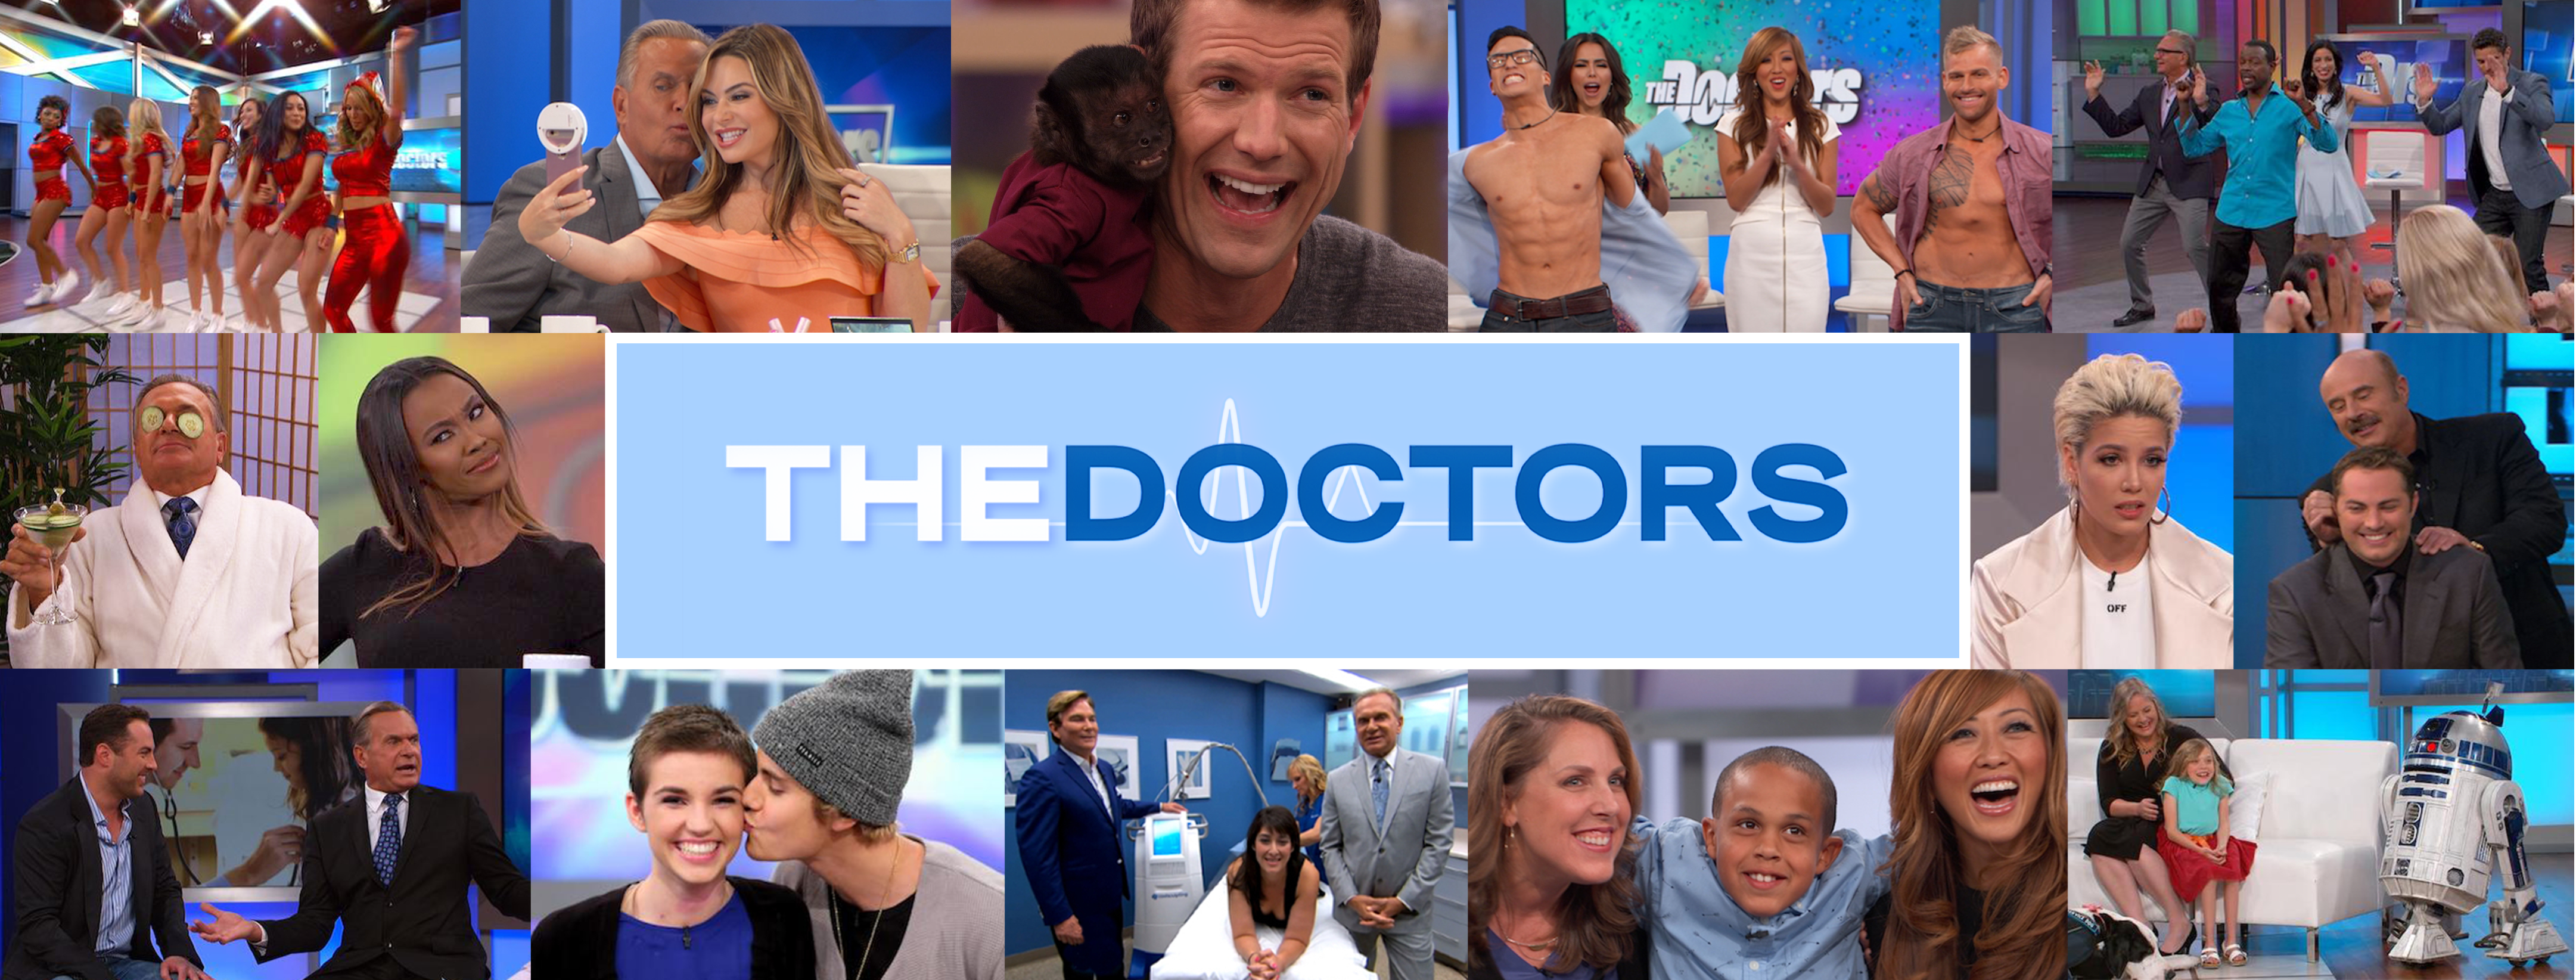 Kirk Cameron and The Doctors